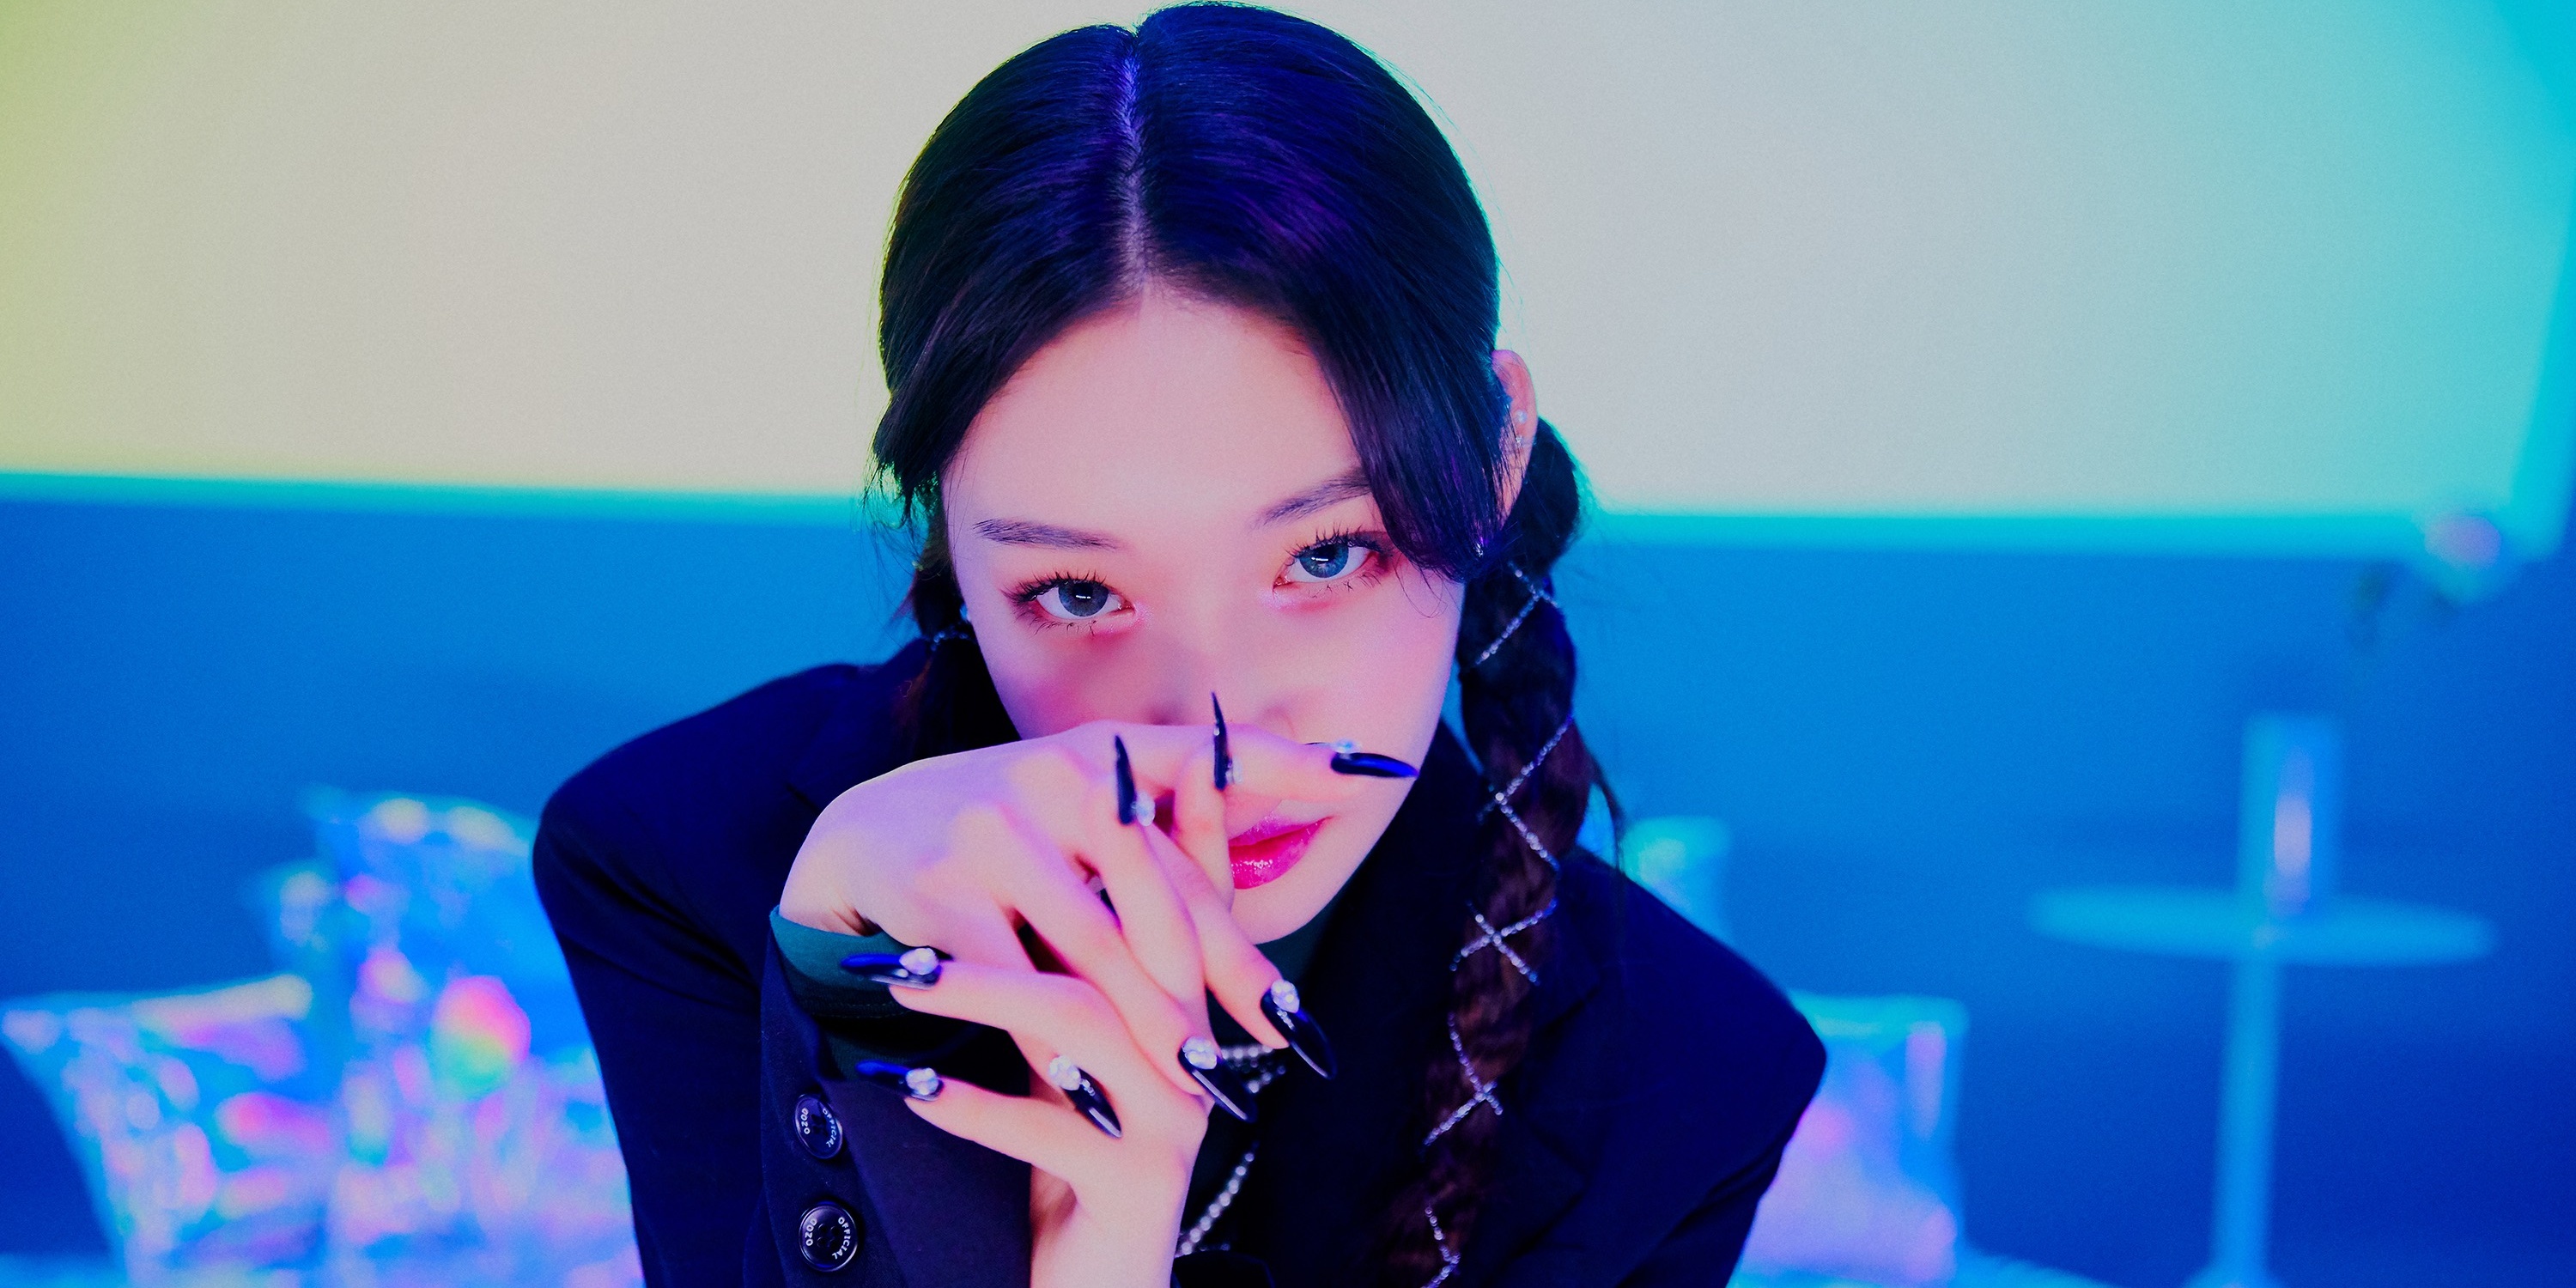 CHUNG HA on overcoming a tough year and drawing strength from her fans